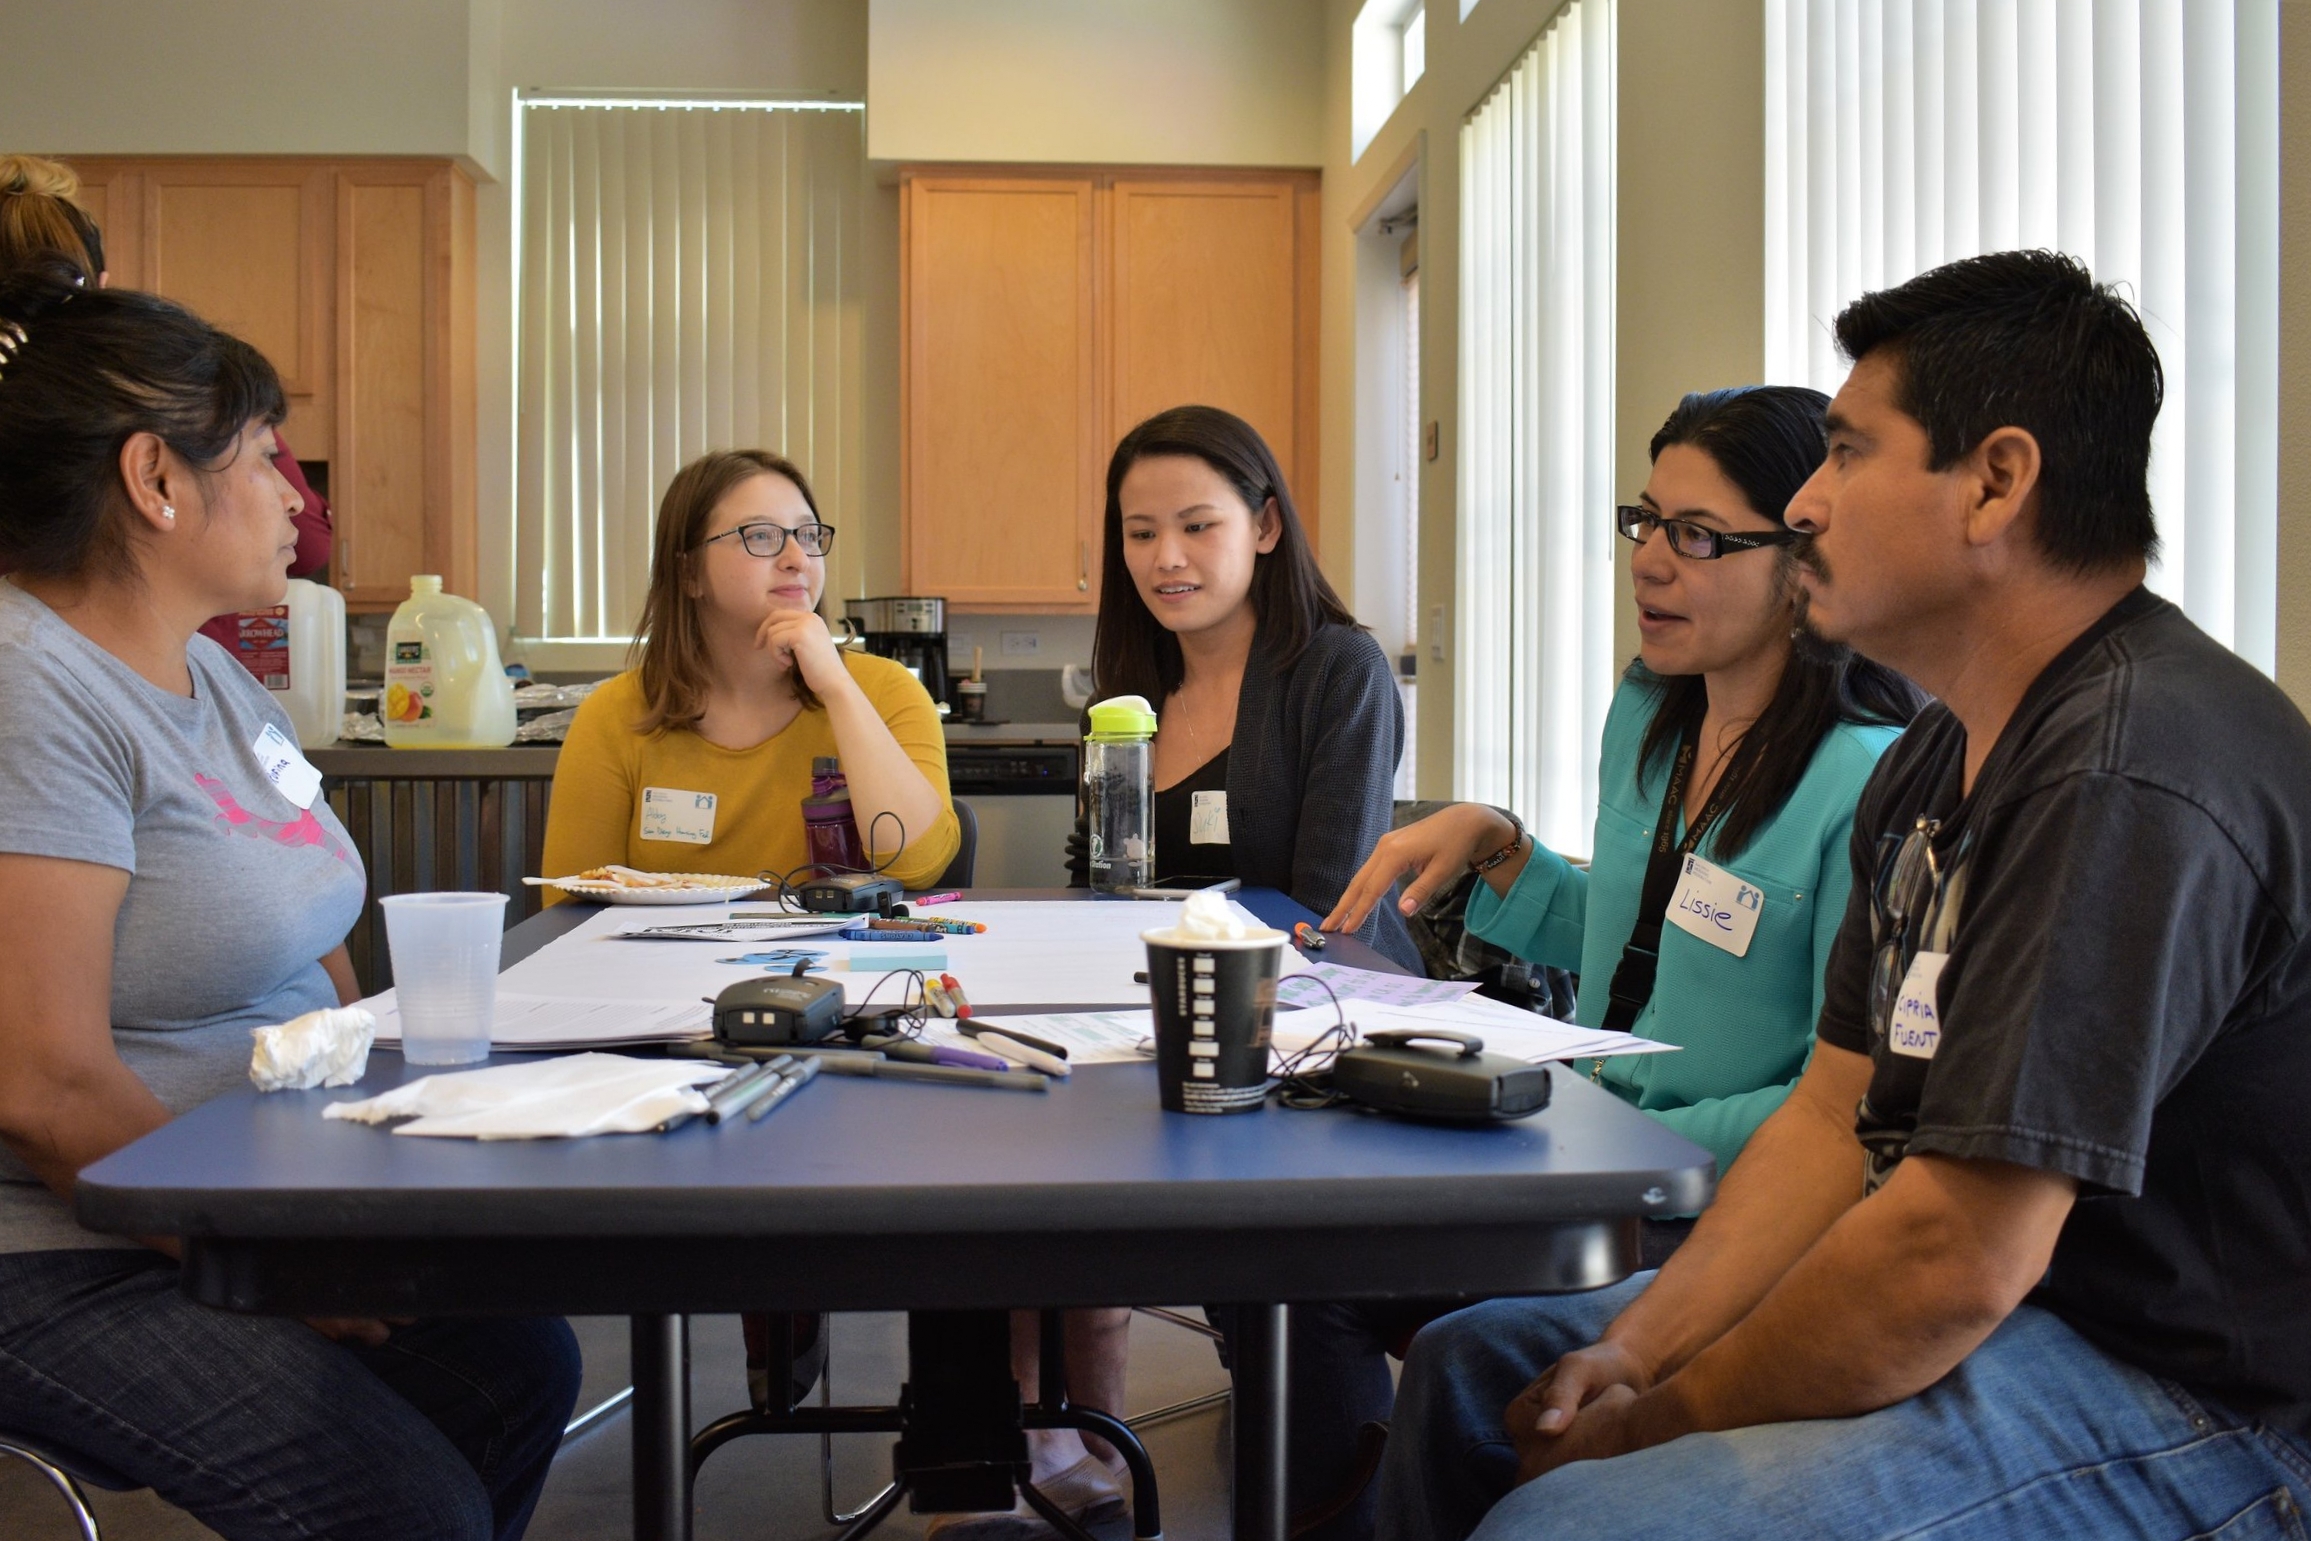 Residents Discussing Priority Housing Issues at Regional Convening, Sept 2018